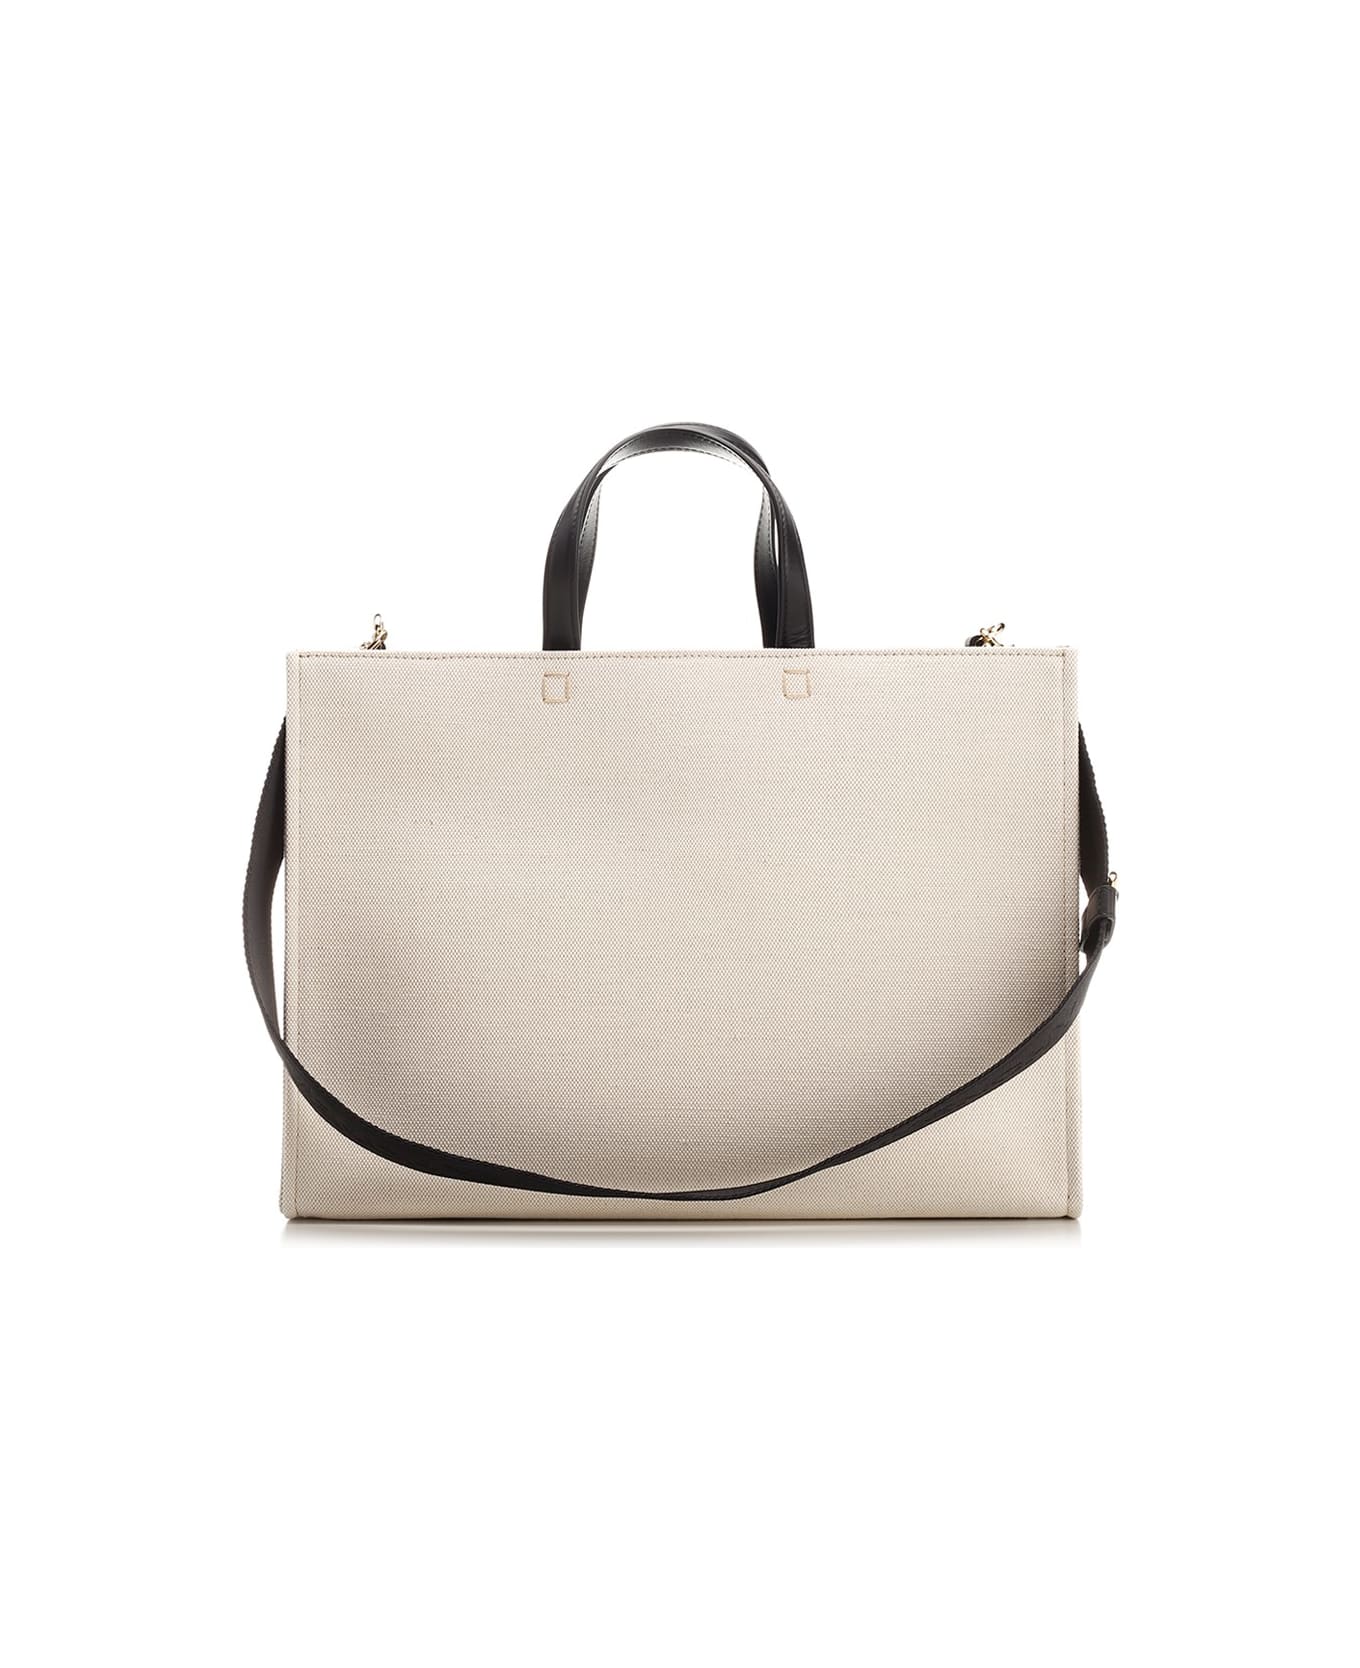 Givenchy 'g' Canvas Tote Bag - WHITE